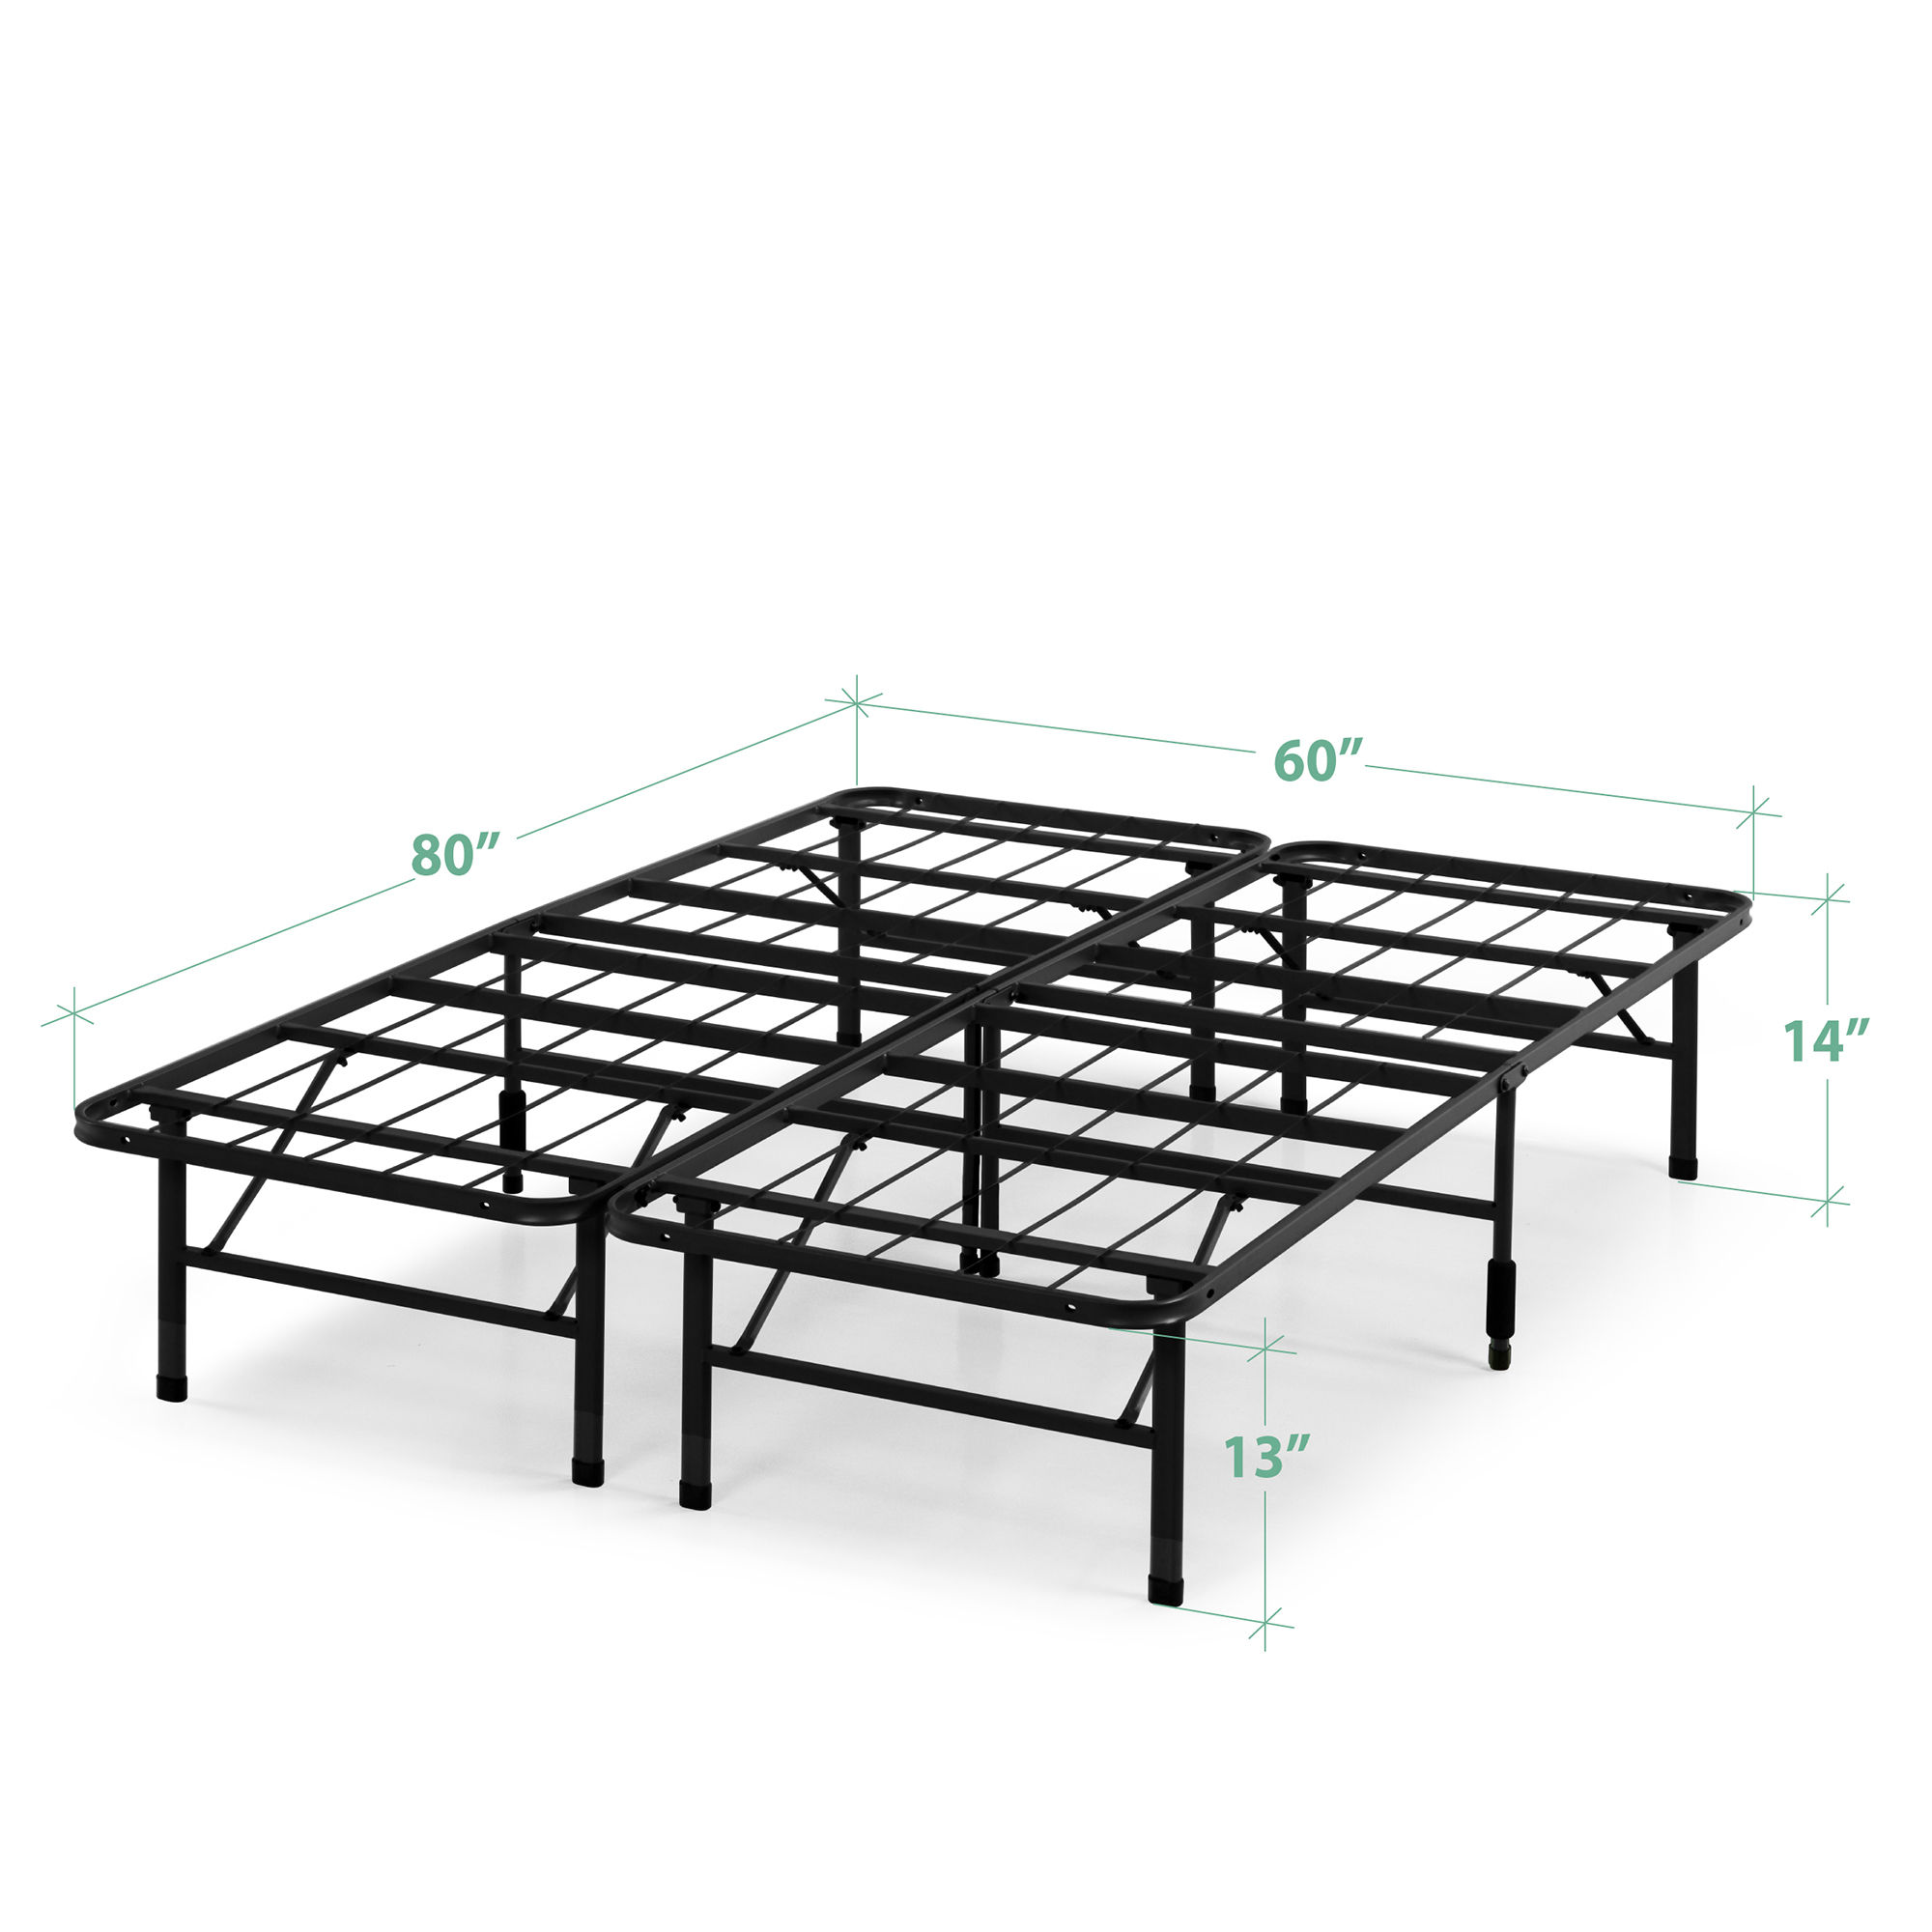 Zinus 14" Black Metal SmartBase® Tool-Free Assembly Mattress Foundation, Queen - image 4 of 11